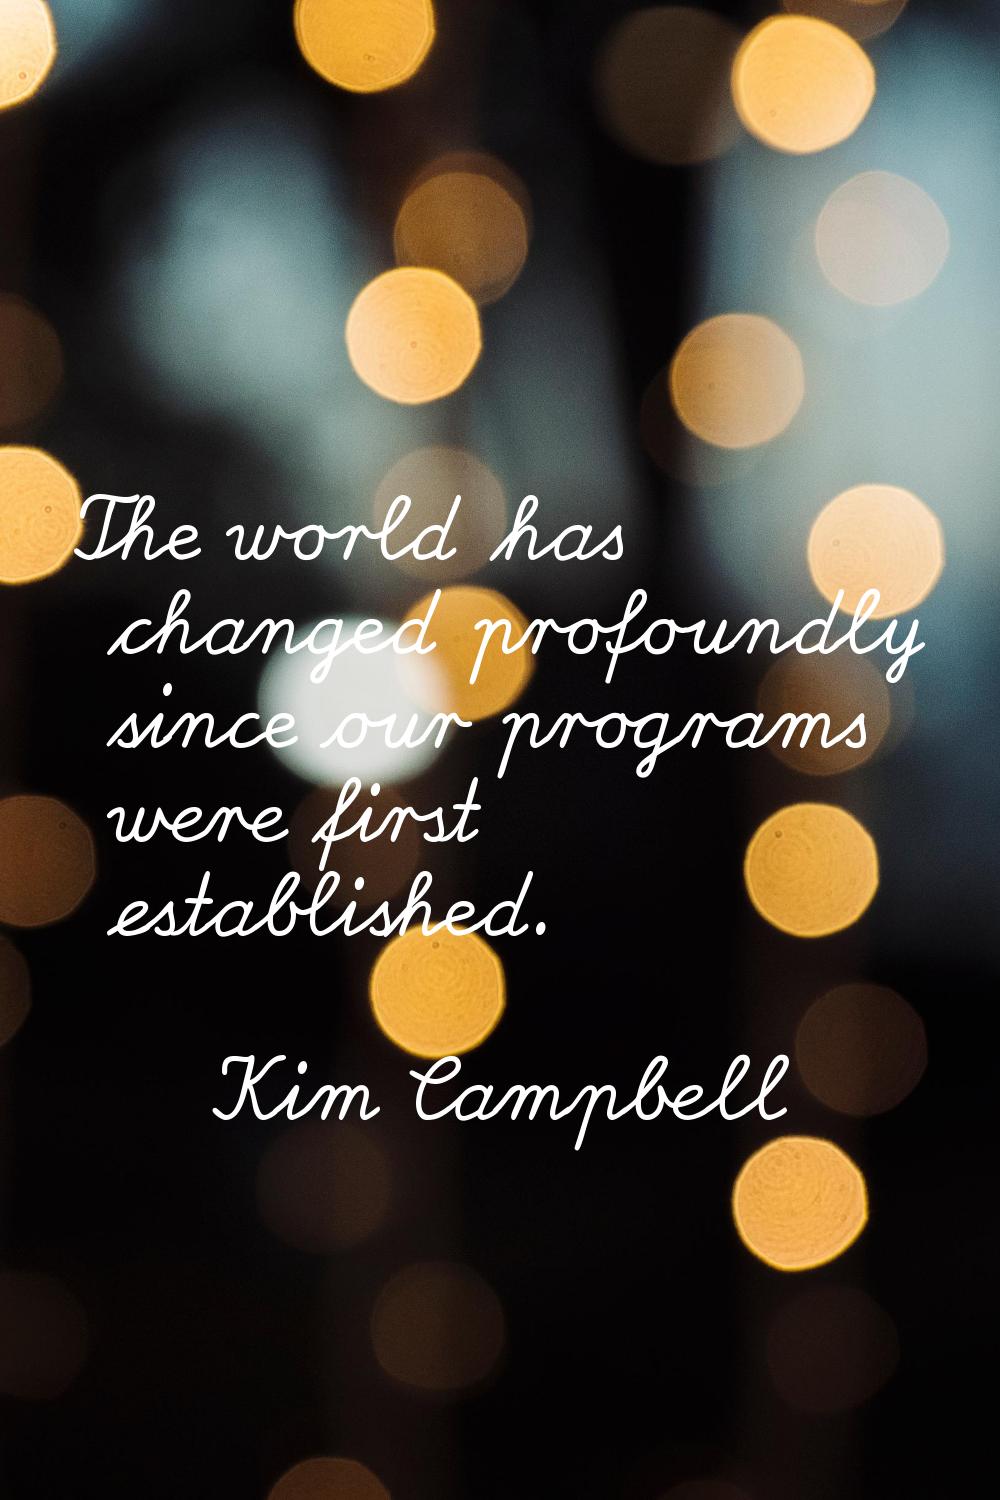 The world has changed profoundly since our programs were first established.